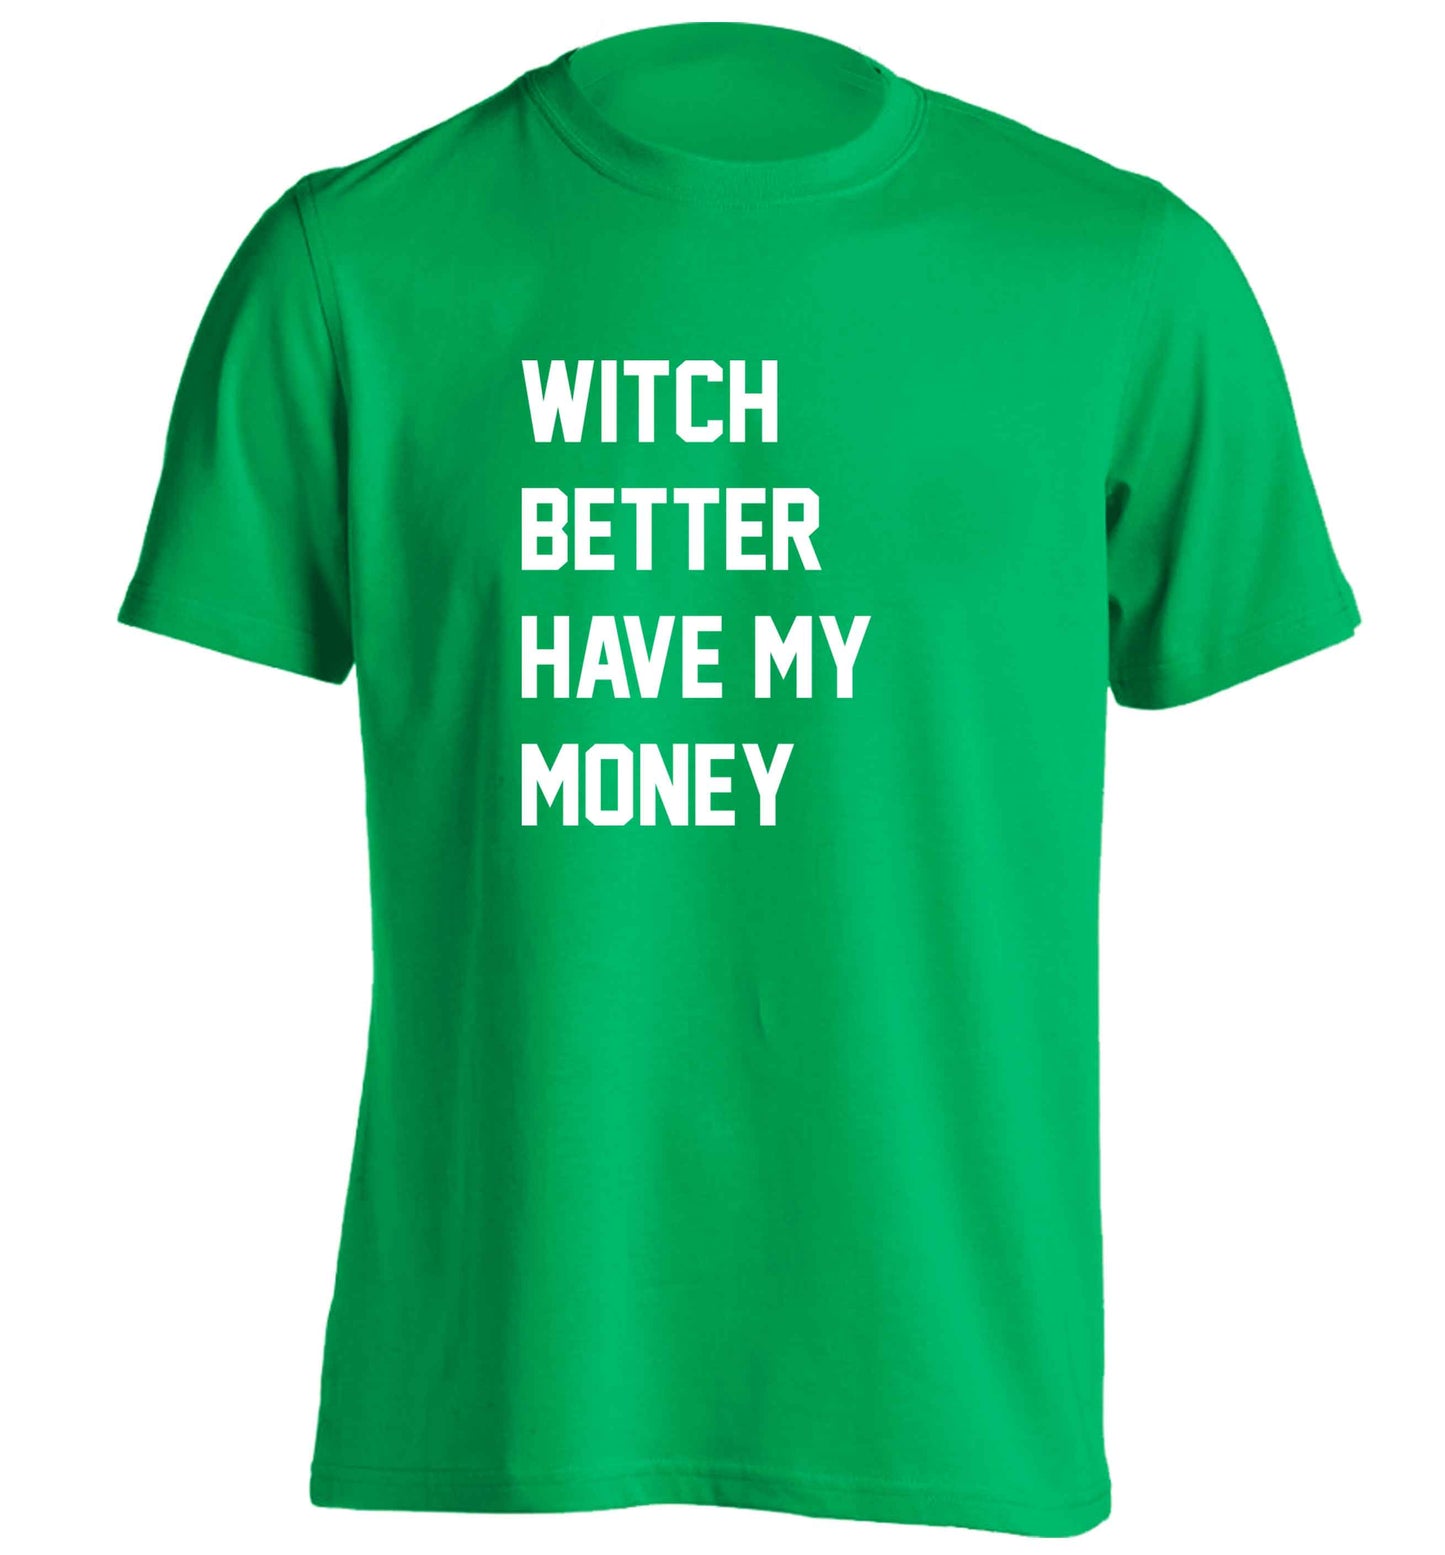 Witch better have my money adults unisex green Tshirt 2XL